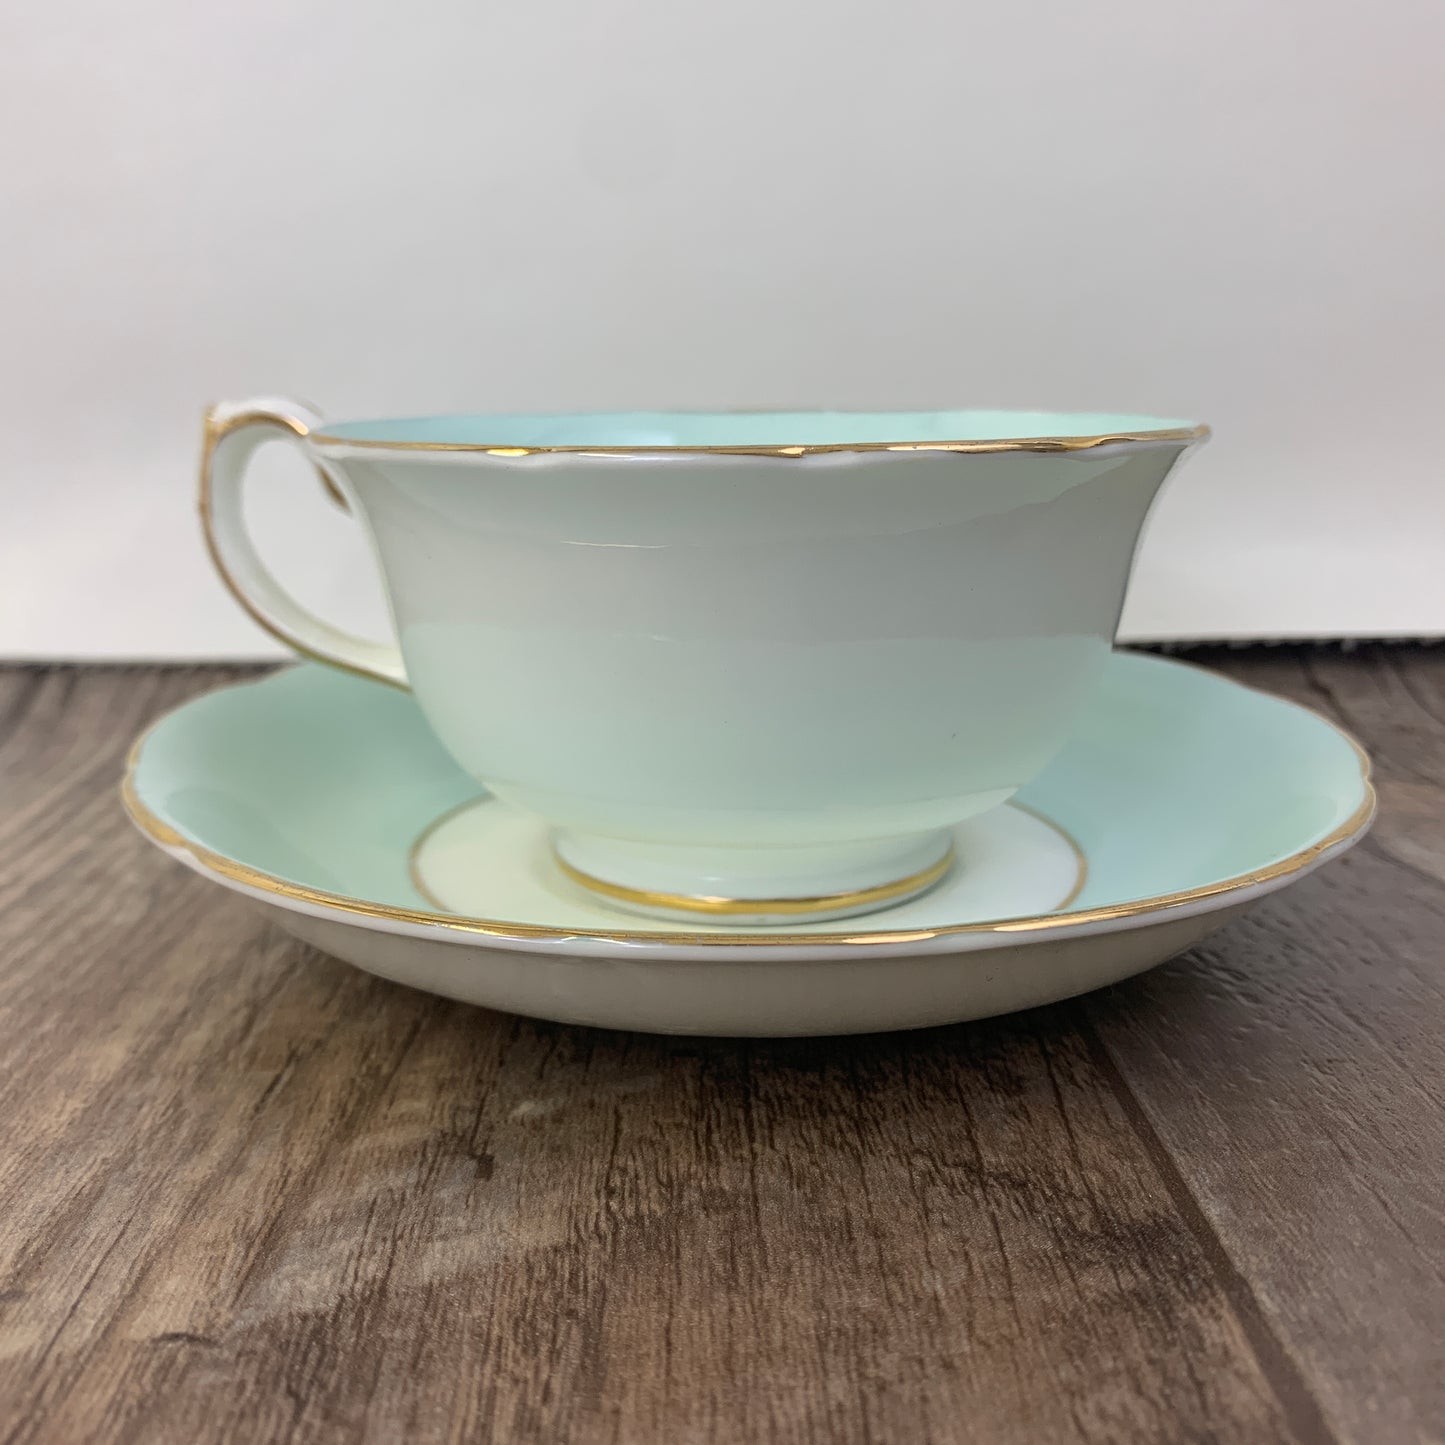 Wide Mouth Tea Cup. Pale Green and White Hammersley Vintage Teacup